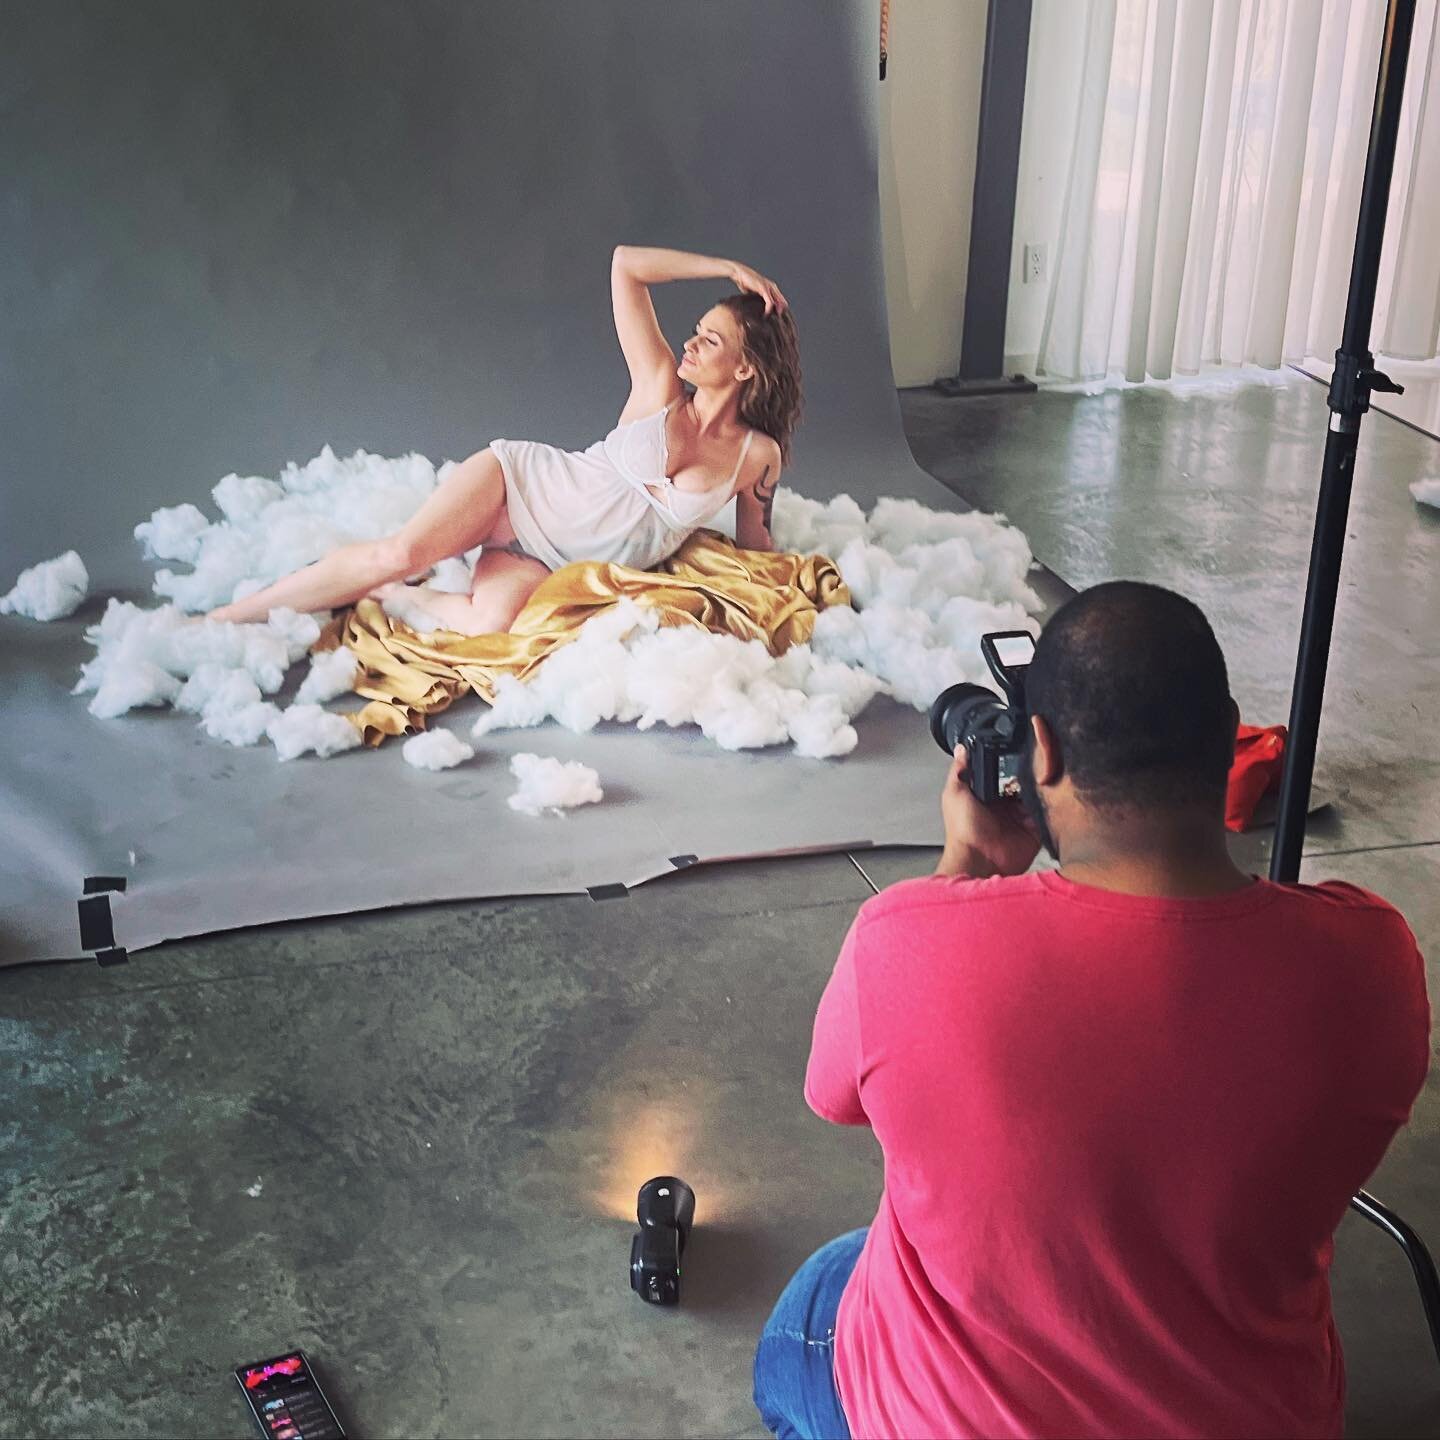 Get your head in the clouds and your booty in the studio! Conceptual shoot with KC Glamour Photographer @shotbysachi and his clients Cloud Angel @akay816 and Fur Baby @devils_daughter777 give them a follow to see the final edits once he works his mag